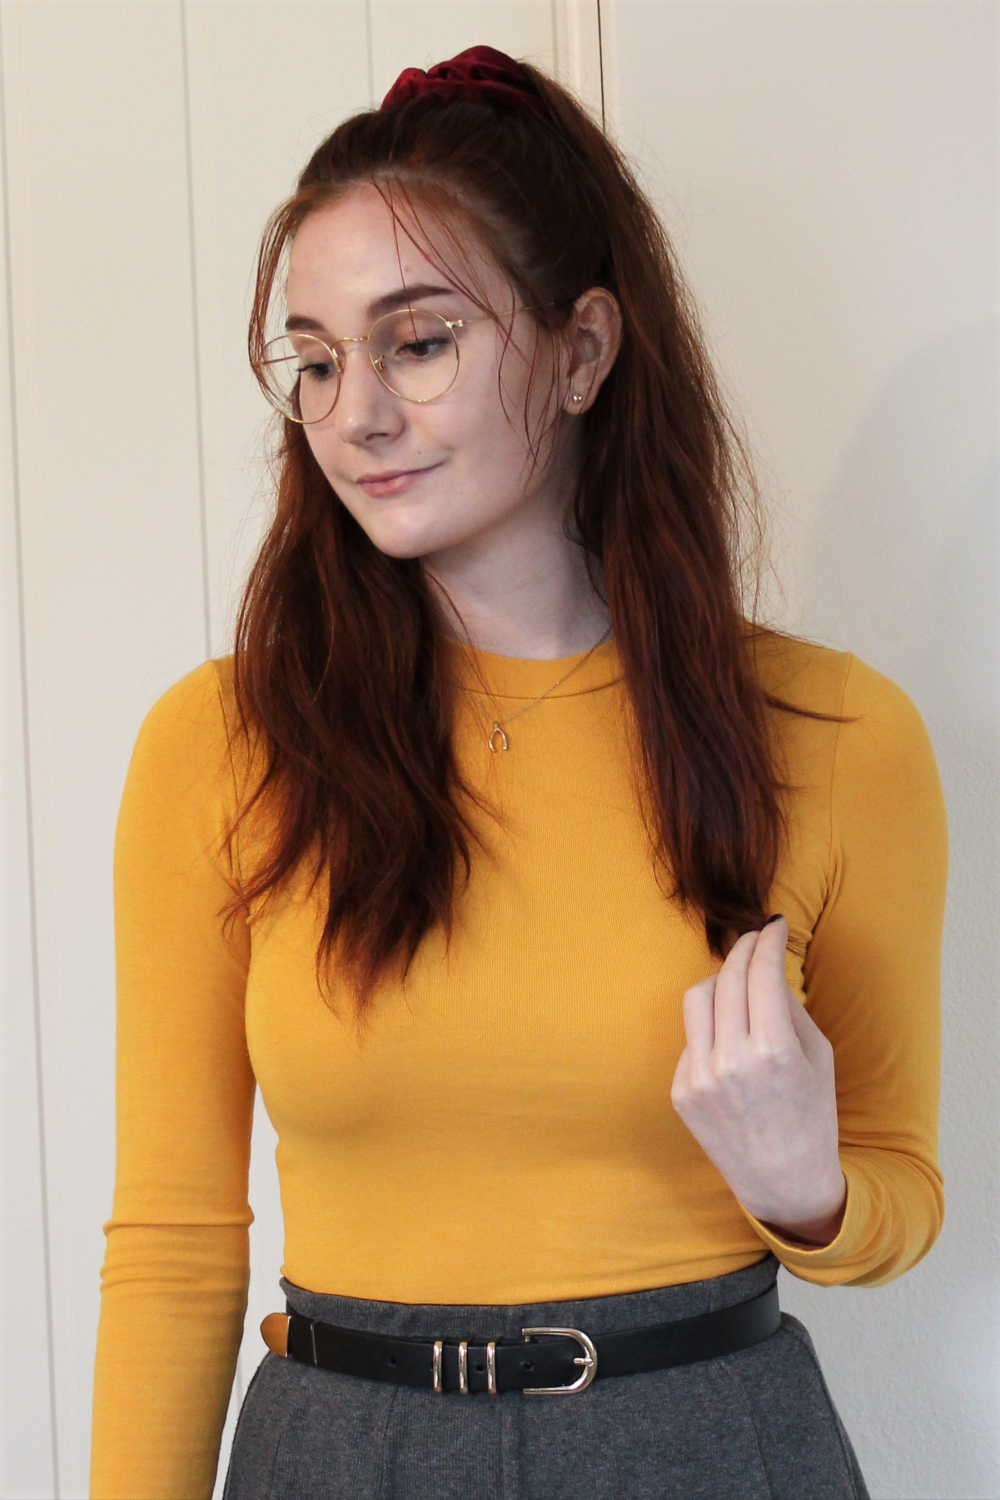 Mustard yellow outfit for school